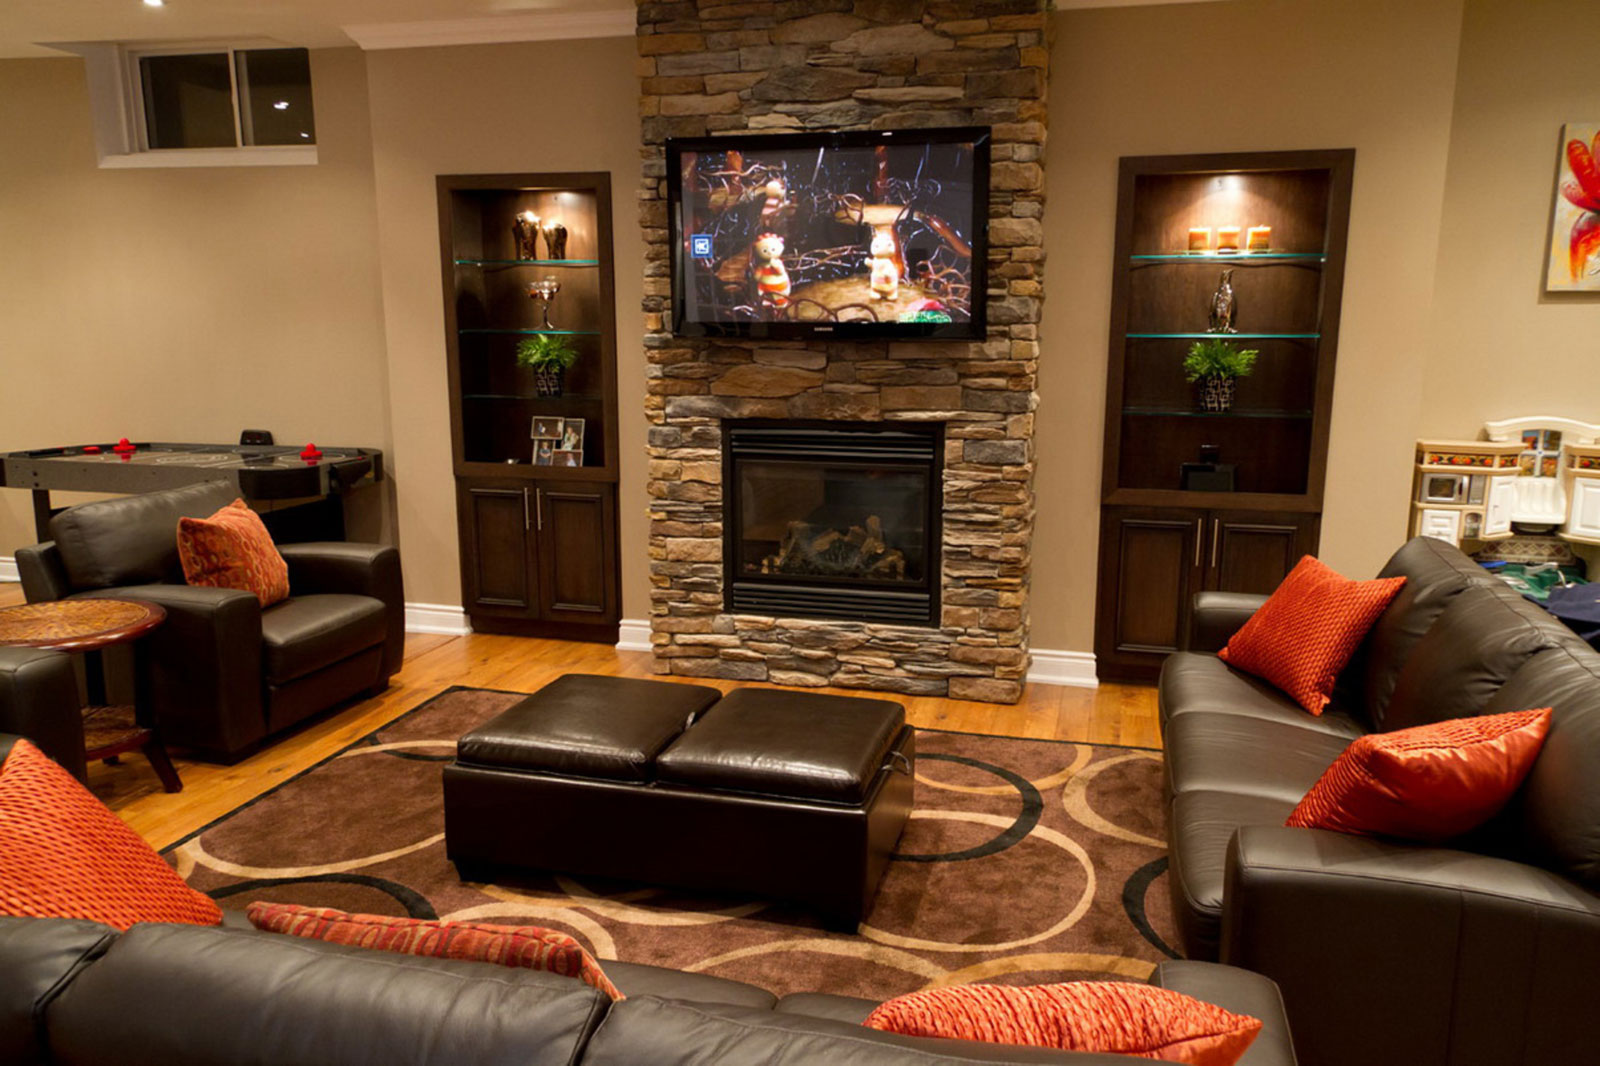 Basement Remodeling Minimalist Small Basement Remodeling Ideas With Minimalist Contemporary Living Room Using Black Leather Sofa And Stone Fireplace Design Finished Basement Ideas With Decorative Style